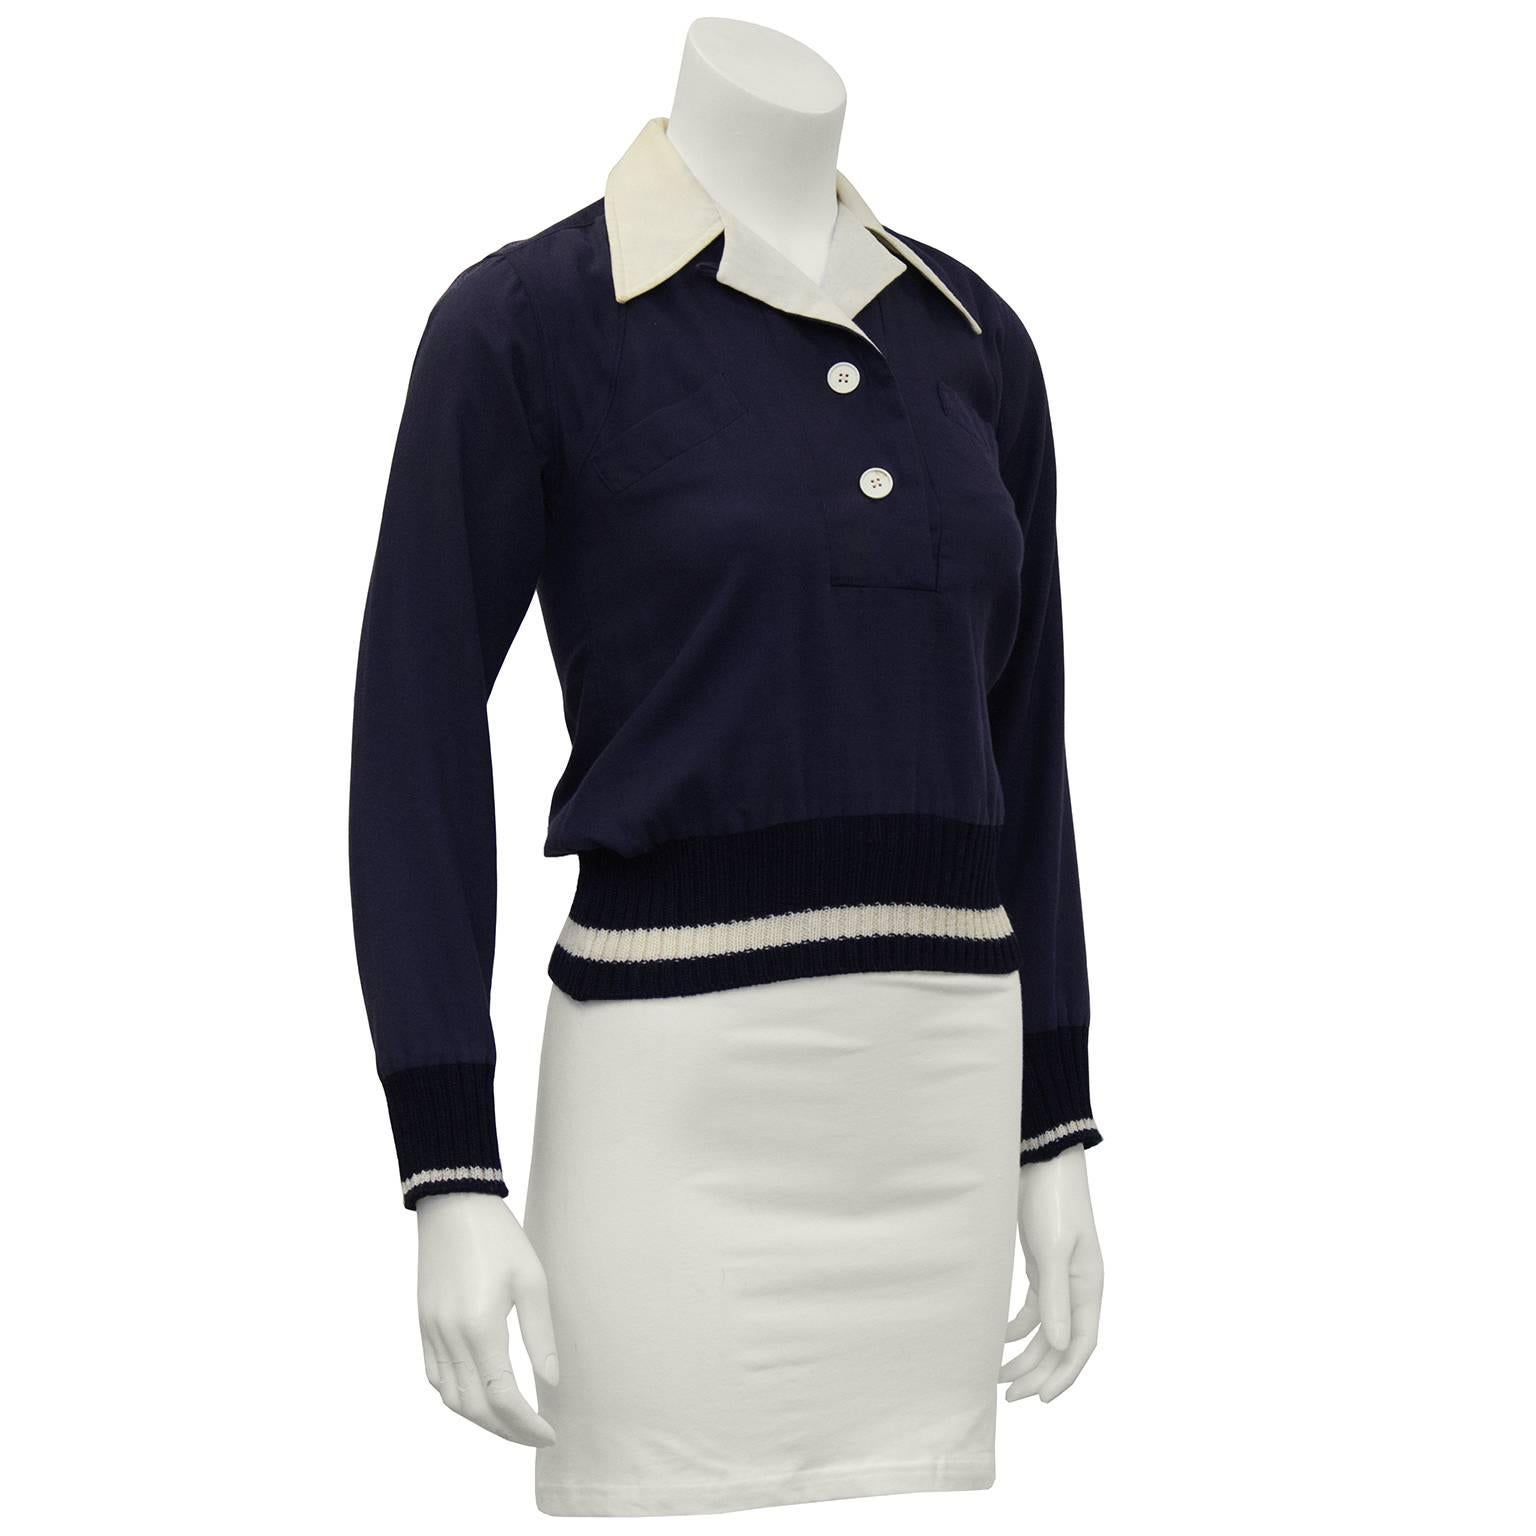 Margaret Howell navy wool gabardine pull over top from the early 1970's. Crisp cream notched collar, two white button opening at the collar. Two slit pockets on the bust and navy and cream knit ribbed cuffs and hem. In excellent condition. Fits like